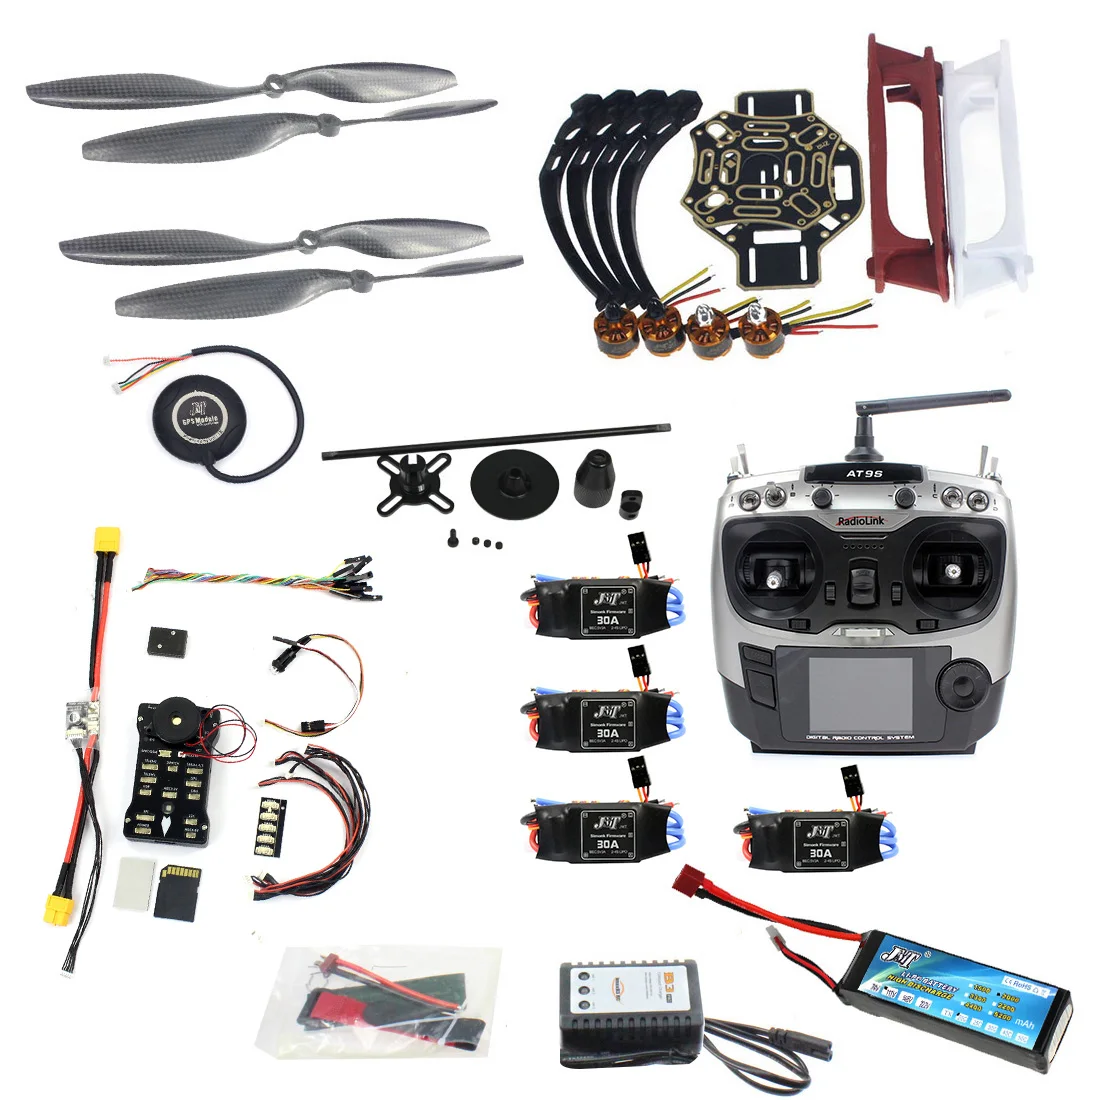 

F02192-AB DIY FPV Drone Quadcopter 4-axle Aircraft Kit 450 Frame PXI PX4 Flight Control 920KV Motor GPS AT9S Transmitter Props